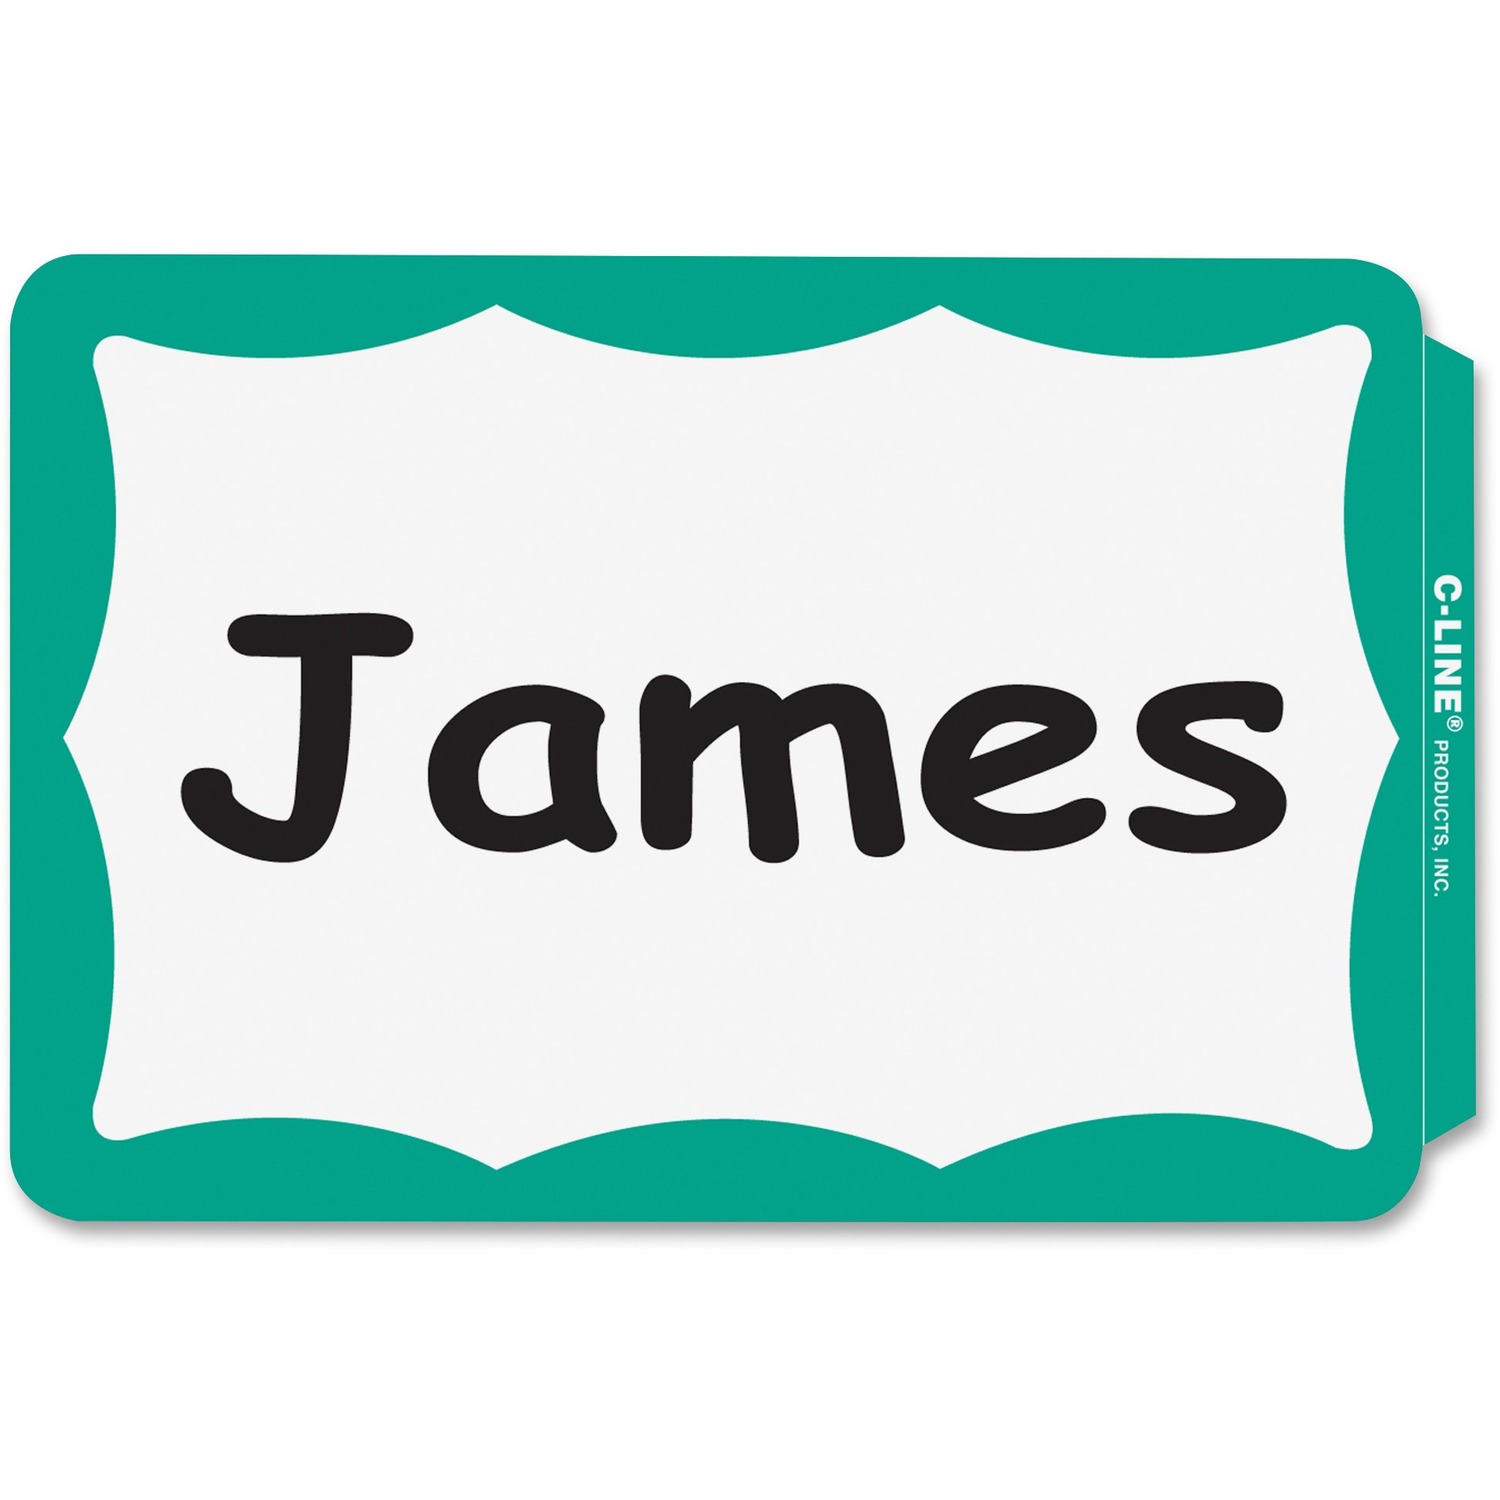 c-line-products-c-line-self-adhesive-border-style-name-badges-green